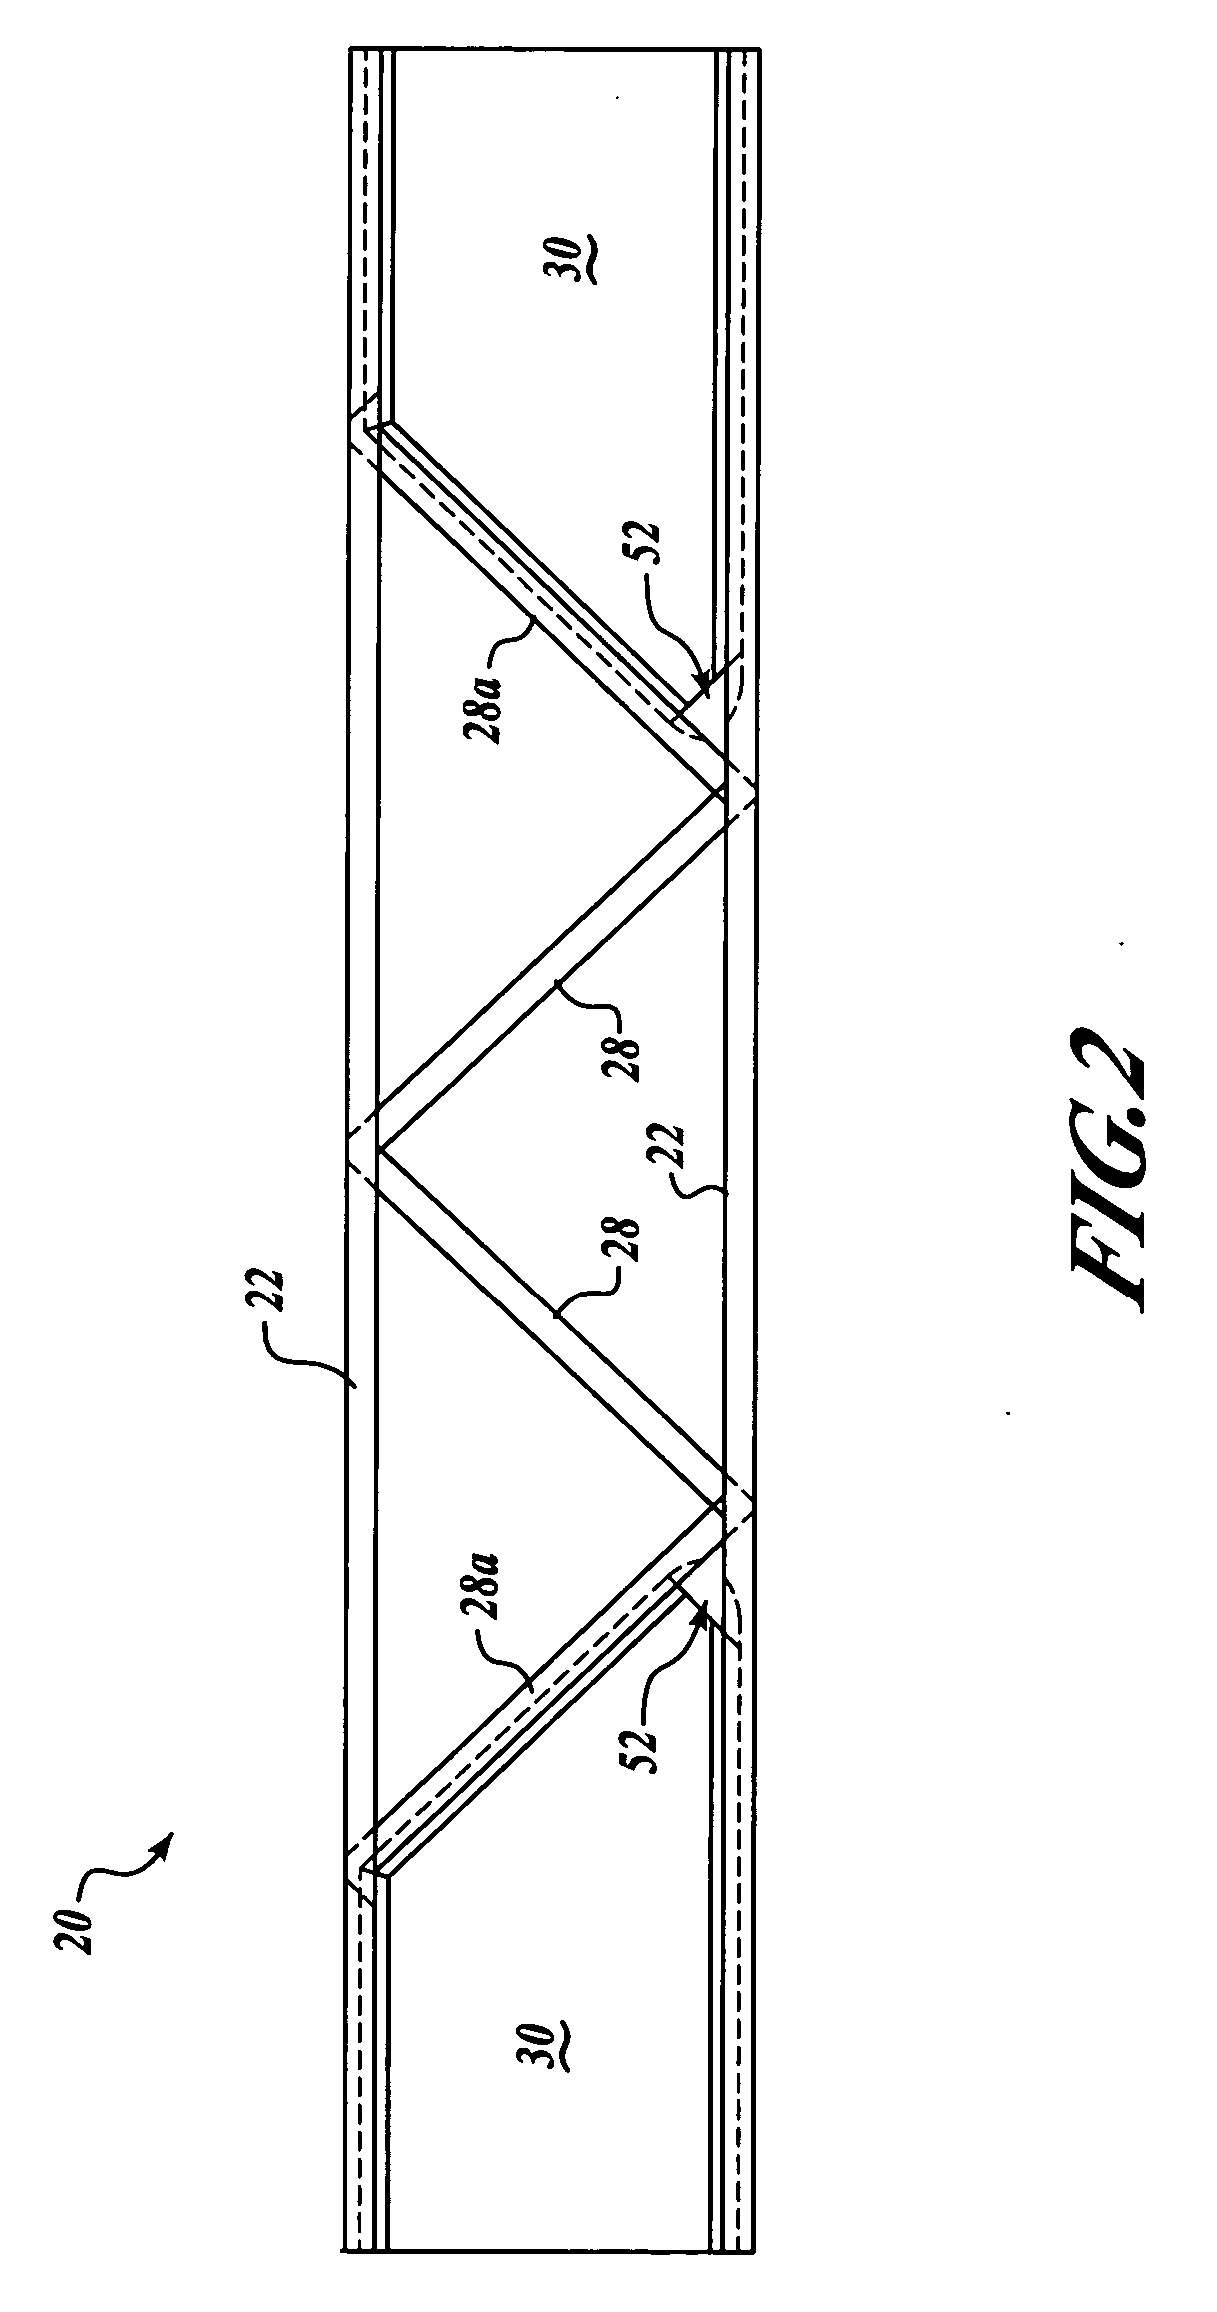 Open web trimmable truss with self locking joint